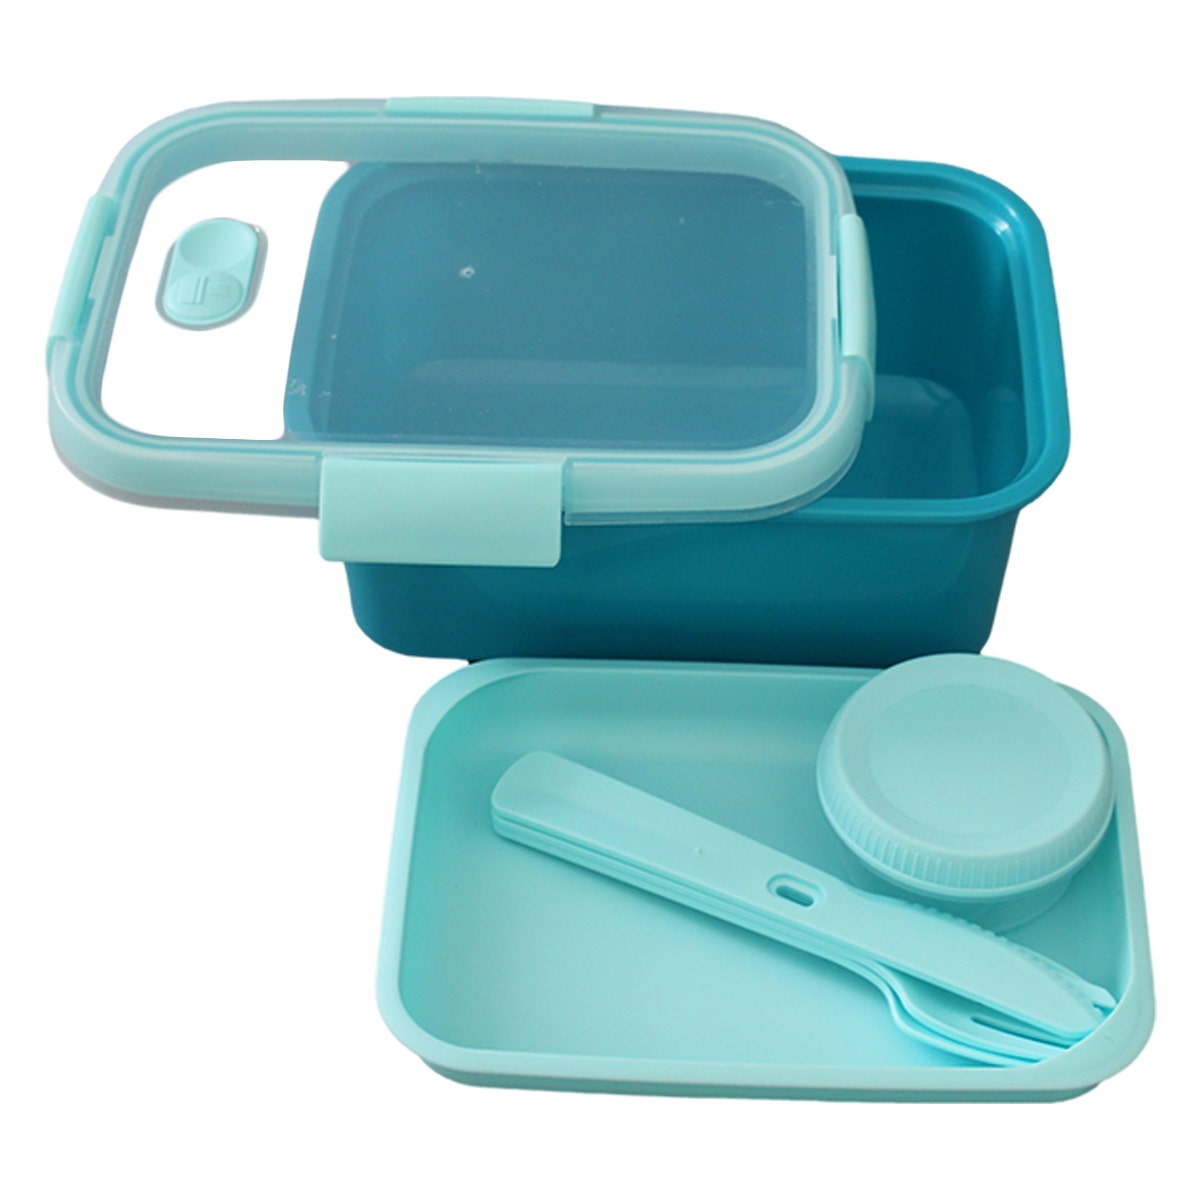 Curver Smart To Go 1.2L Lunch Kit - Utensils, Cup, Locking Lid